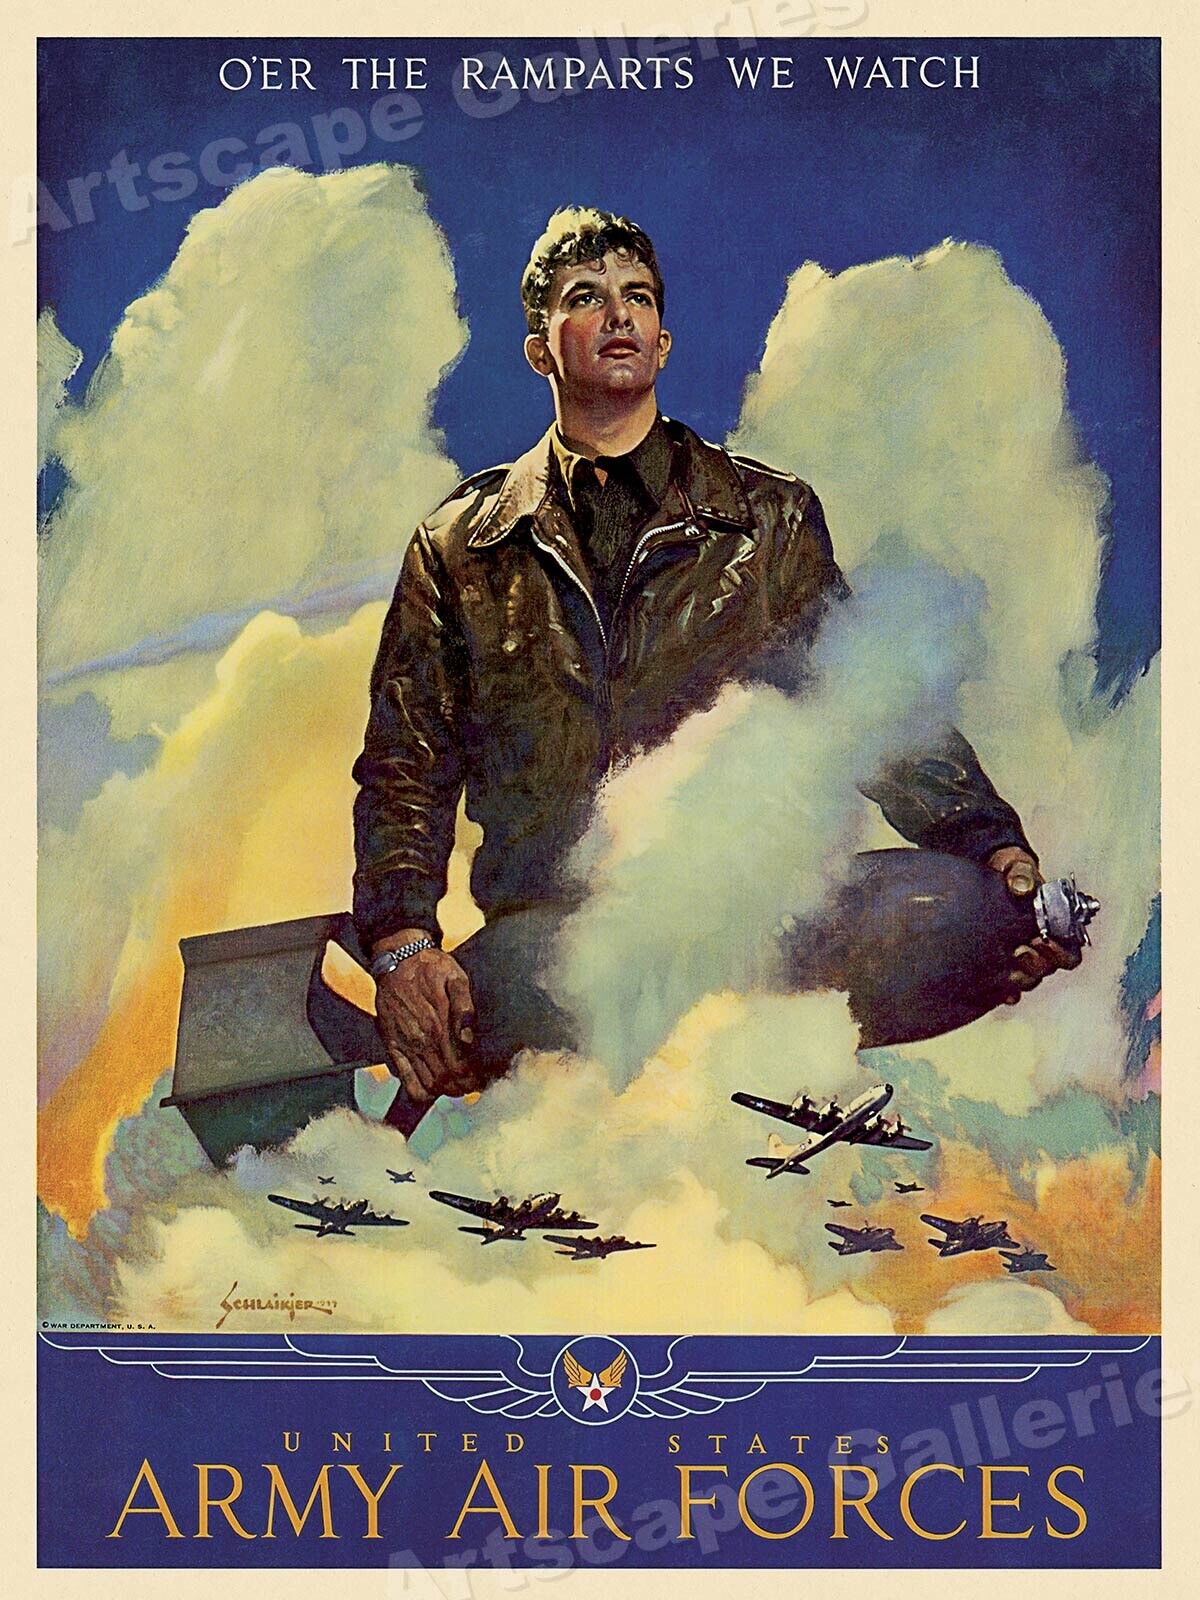 United States Army Air Forces World War II Vintage Style Poster - 18x24